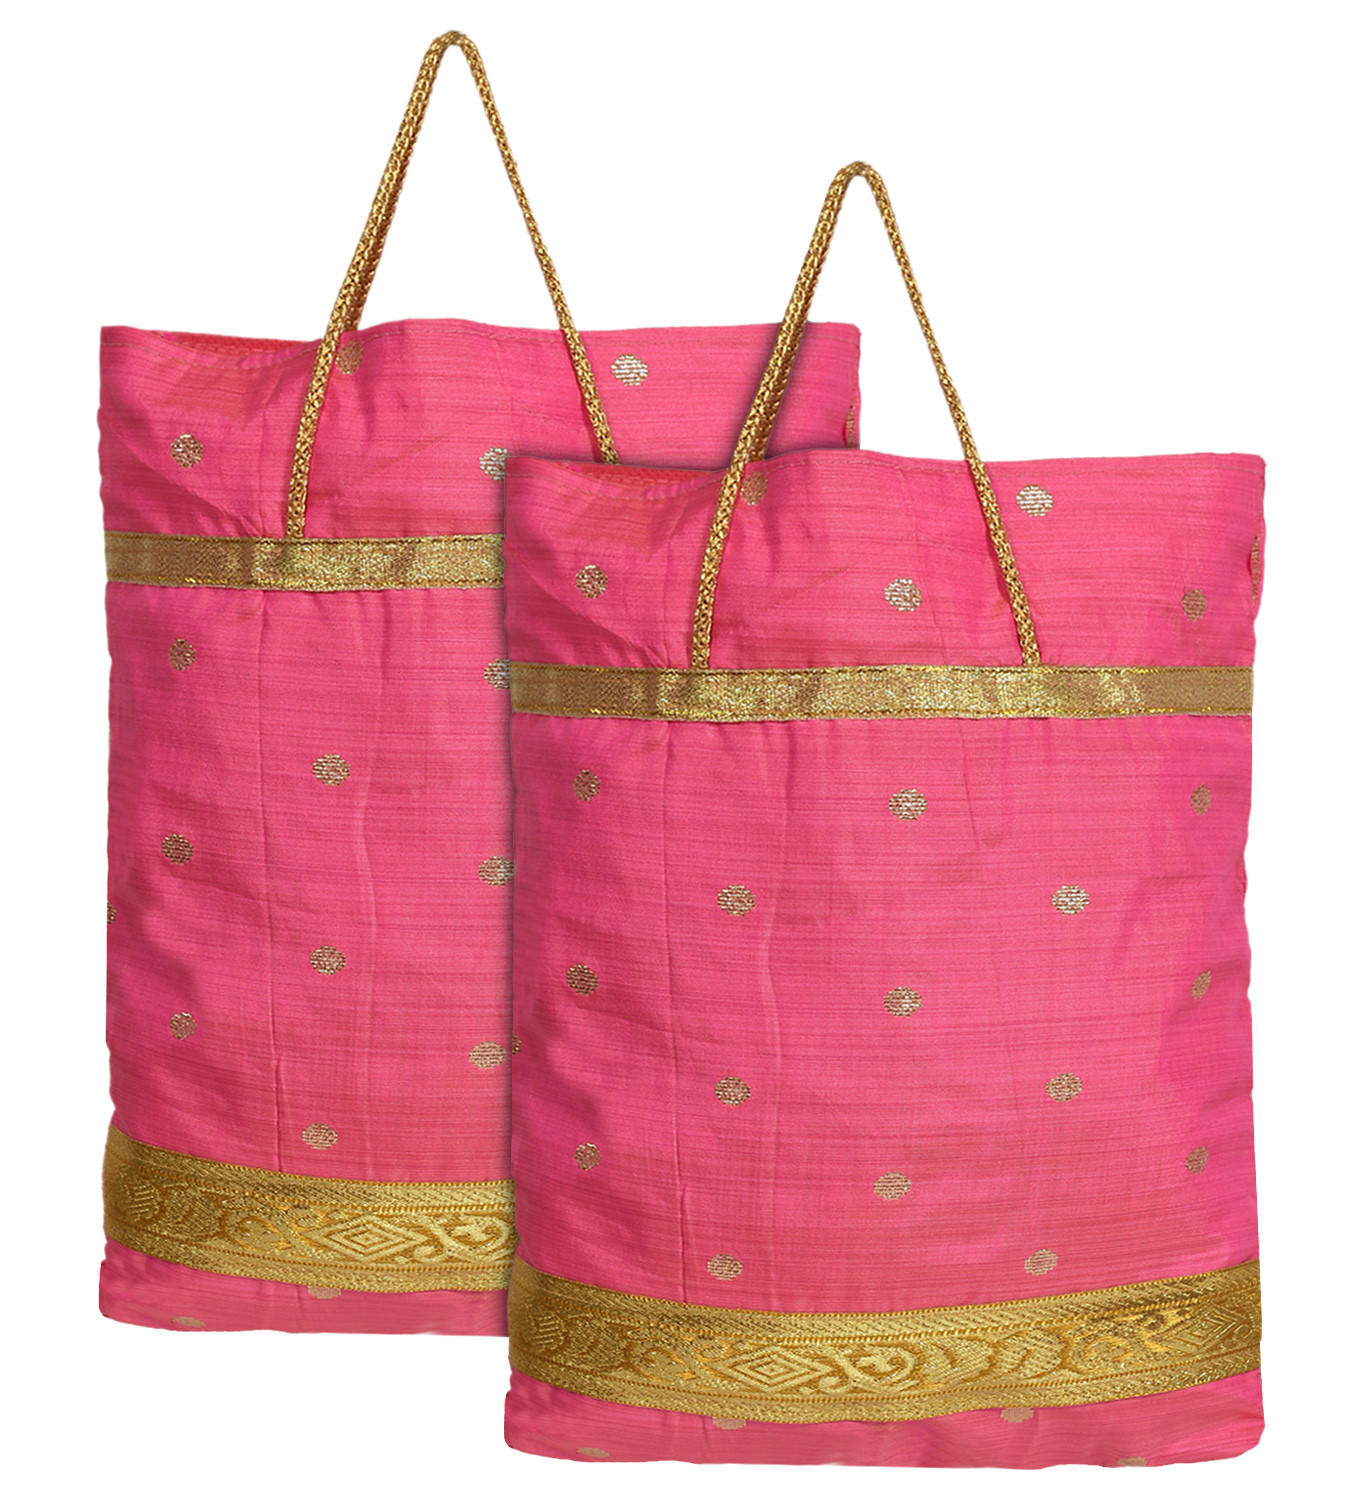 Kuber Industries Polyester Dot Design Foldable Potli|Shopping|Gifting, Hand Bag With Handle (Pink)